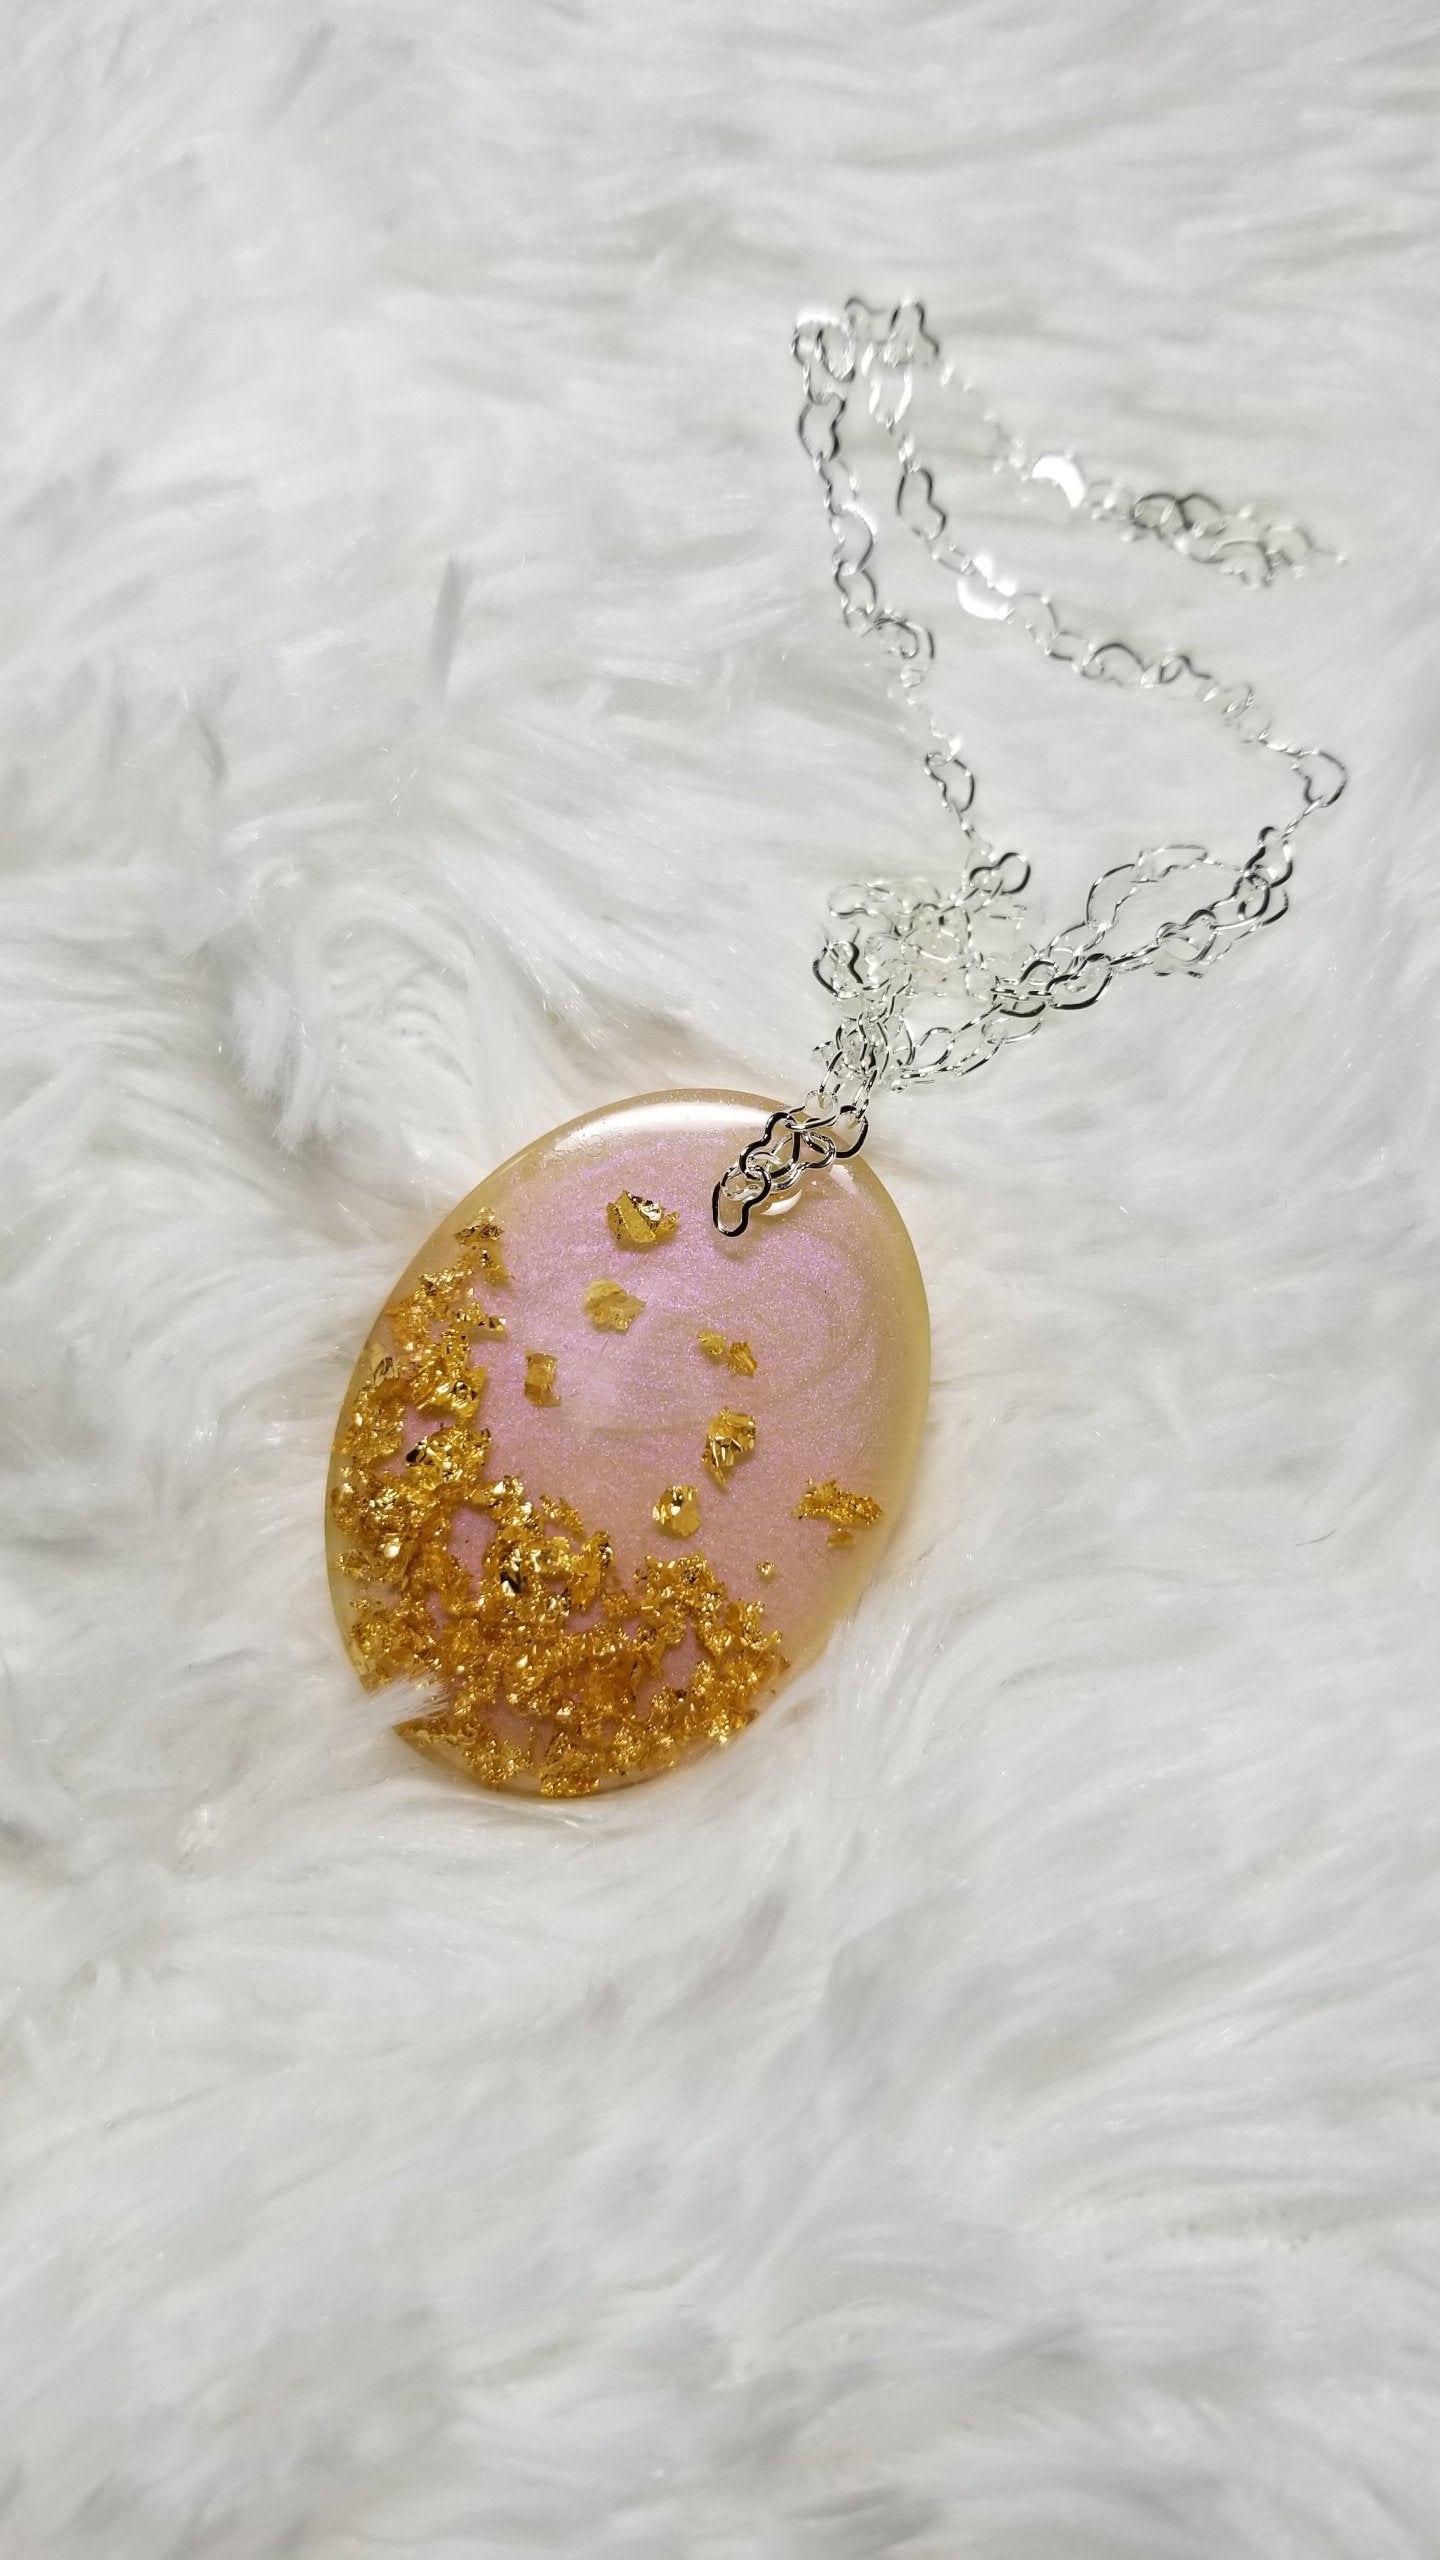 Pink Pendant, Resin Pendant, Bridal Jewelry, Bridesmaid Gift, Gold Pendant, Wedding gift - CCCreationz